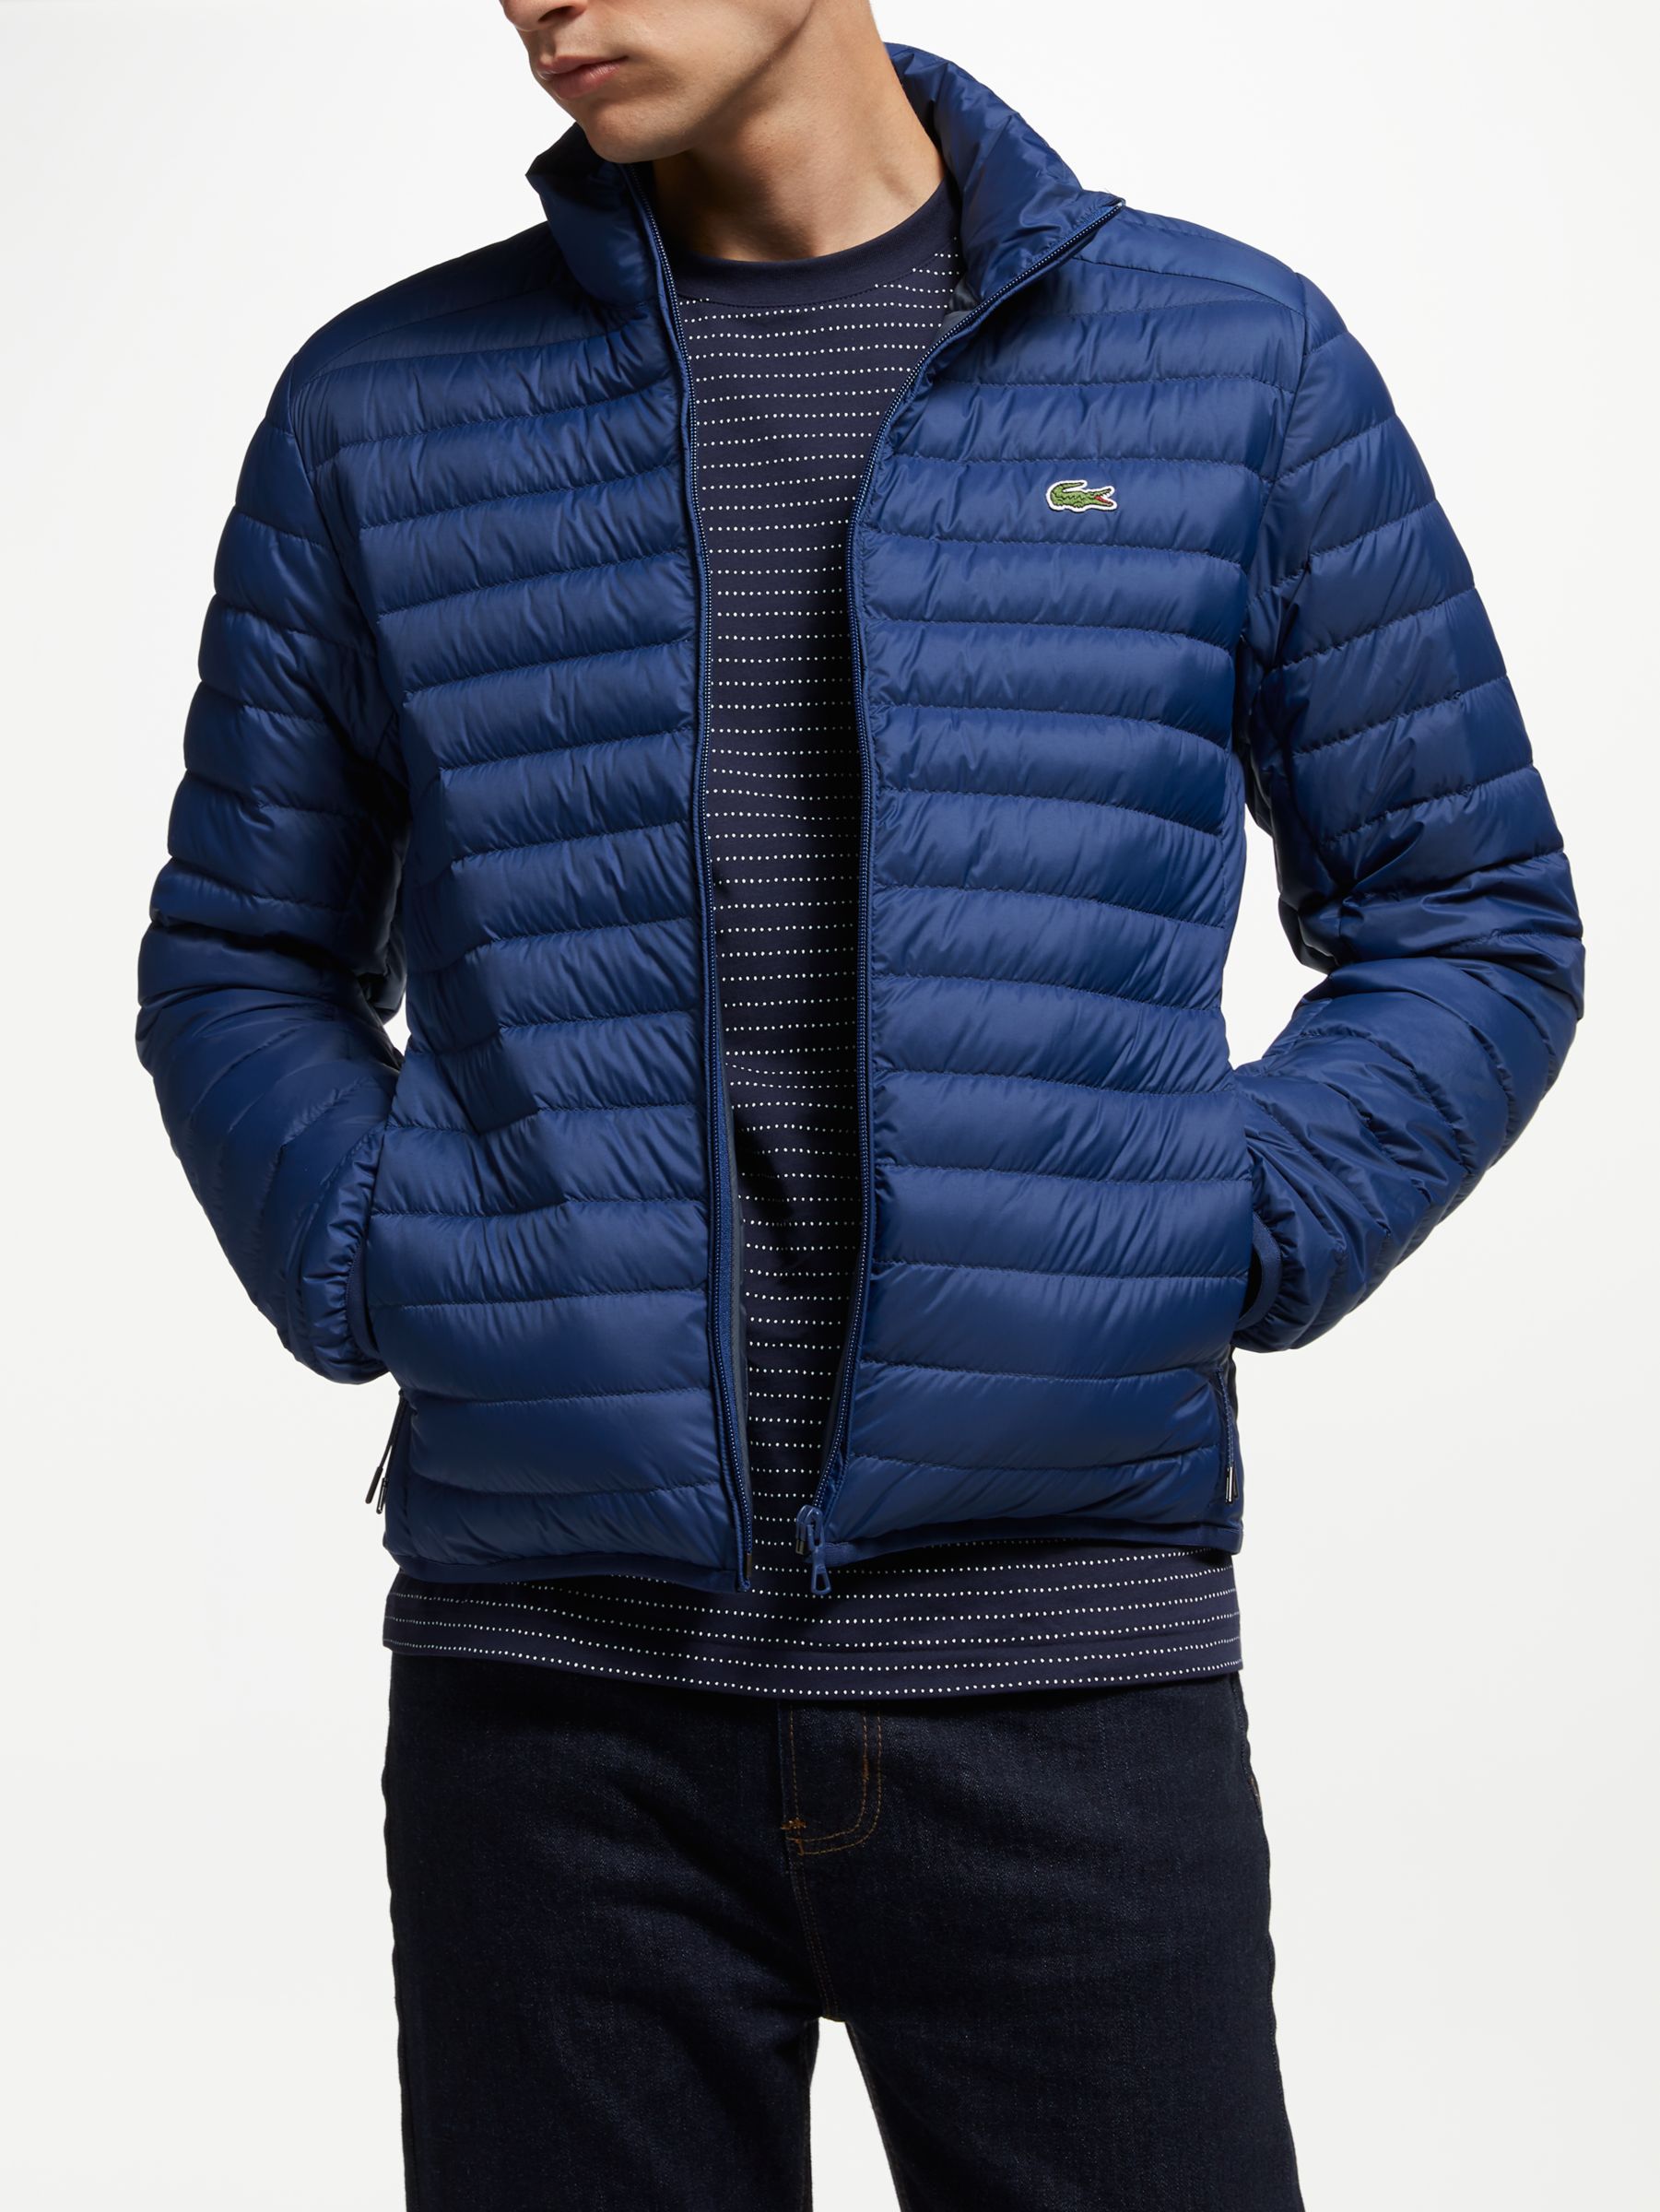 Lacoste Funnel Neck Puffer Jacket, Navy at John Lewis & Partners